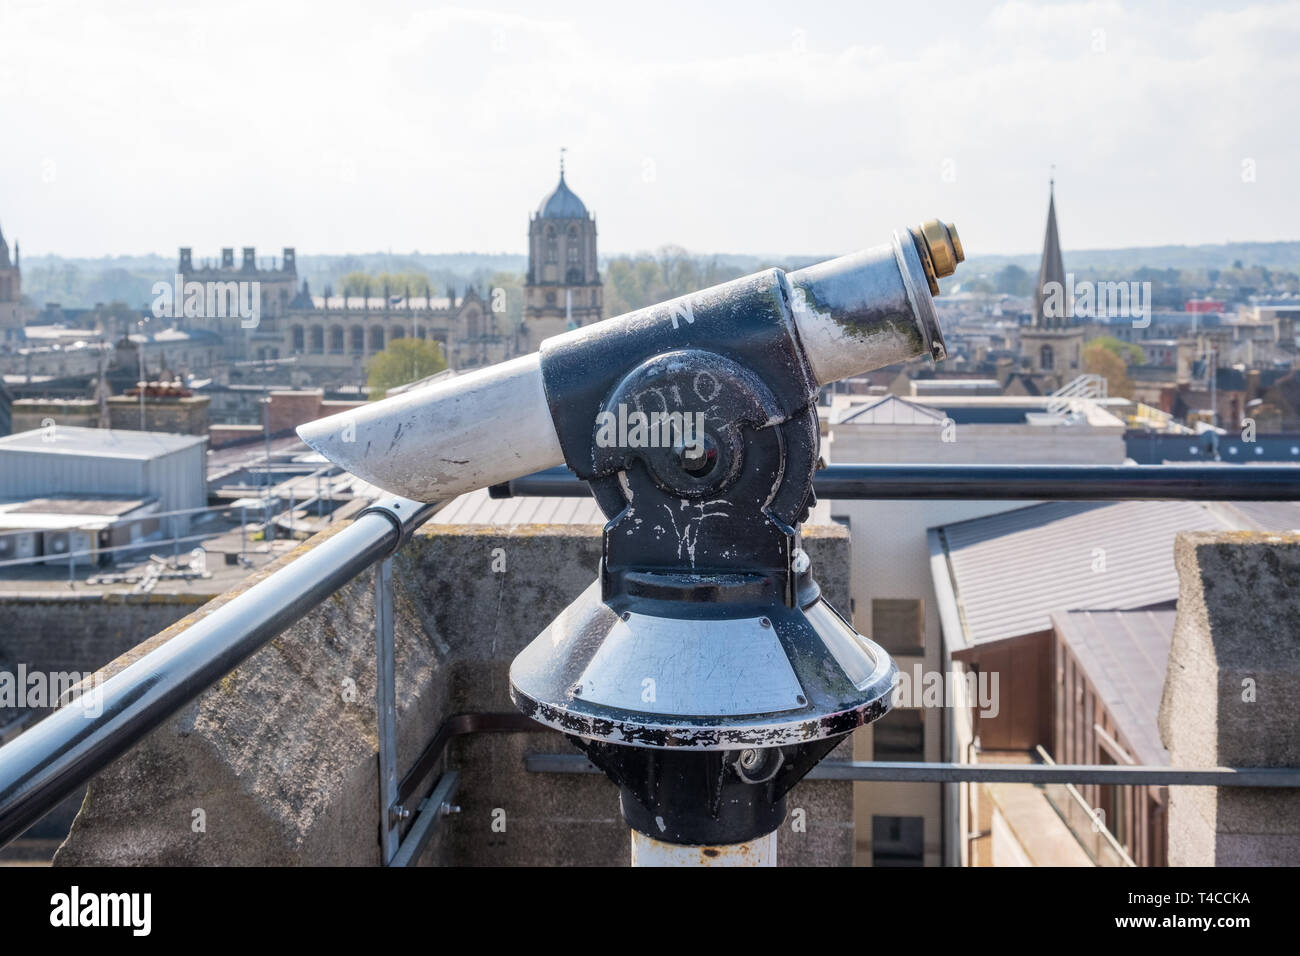 Coin operated telescope on the viewing platform on the rooftop of the 12th Century Carfax Tower in Oxford, UK Stock Photo